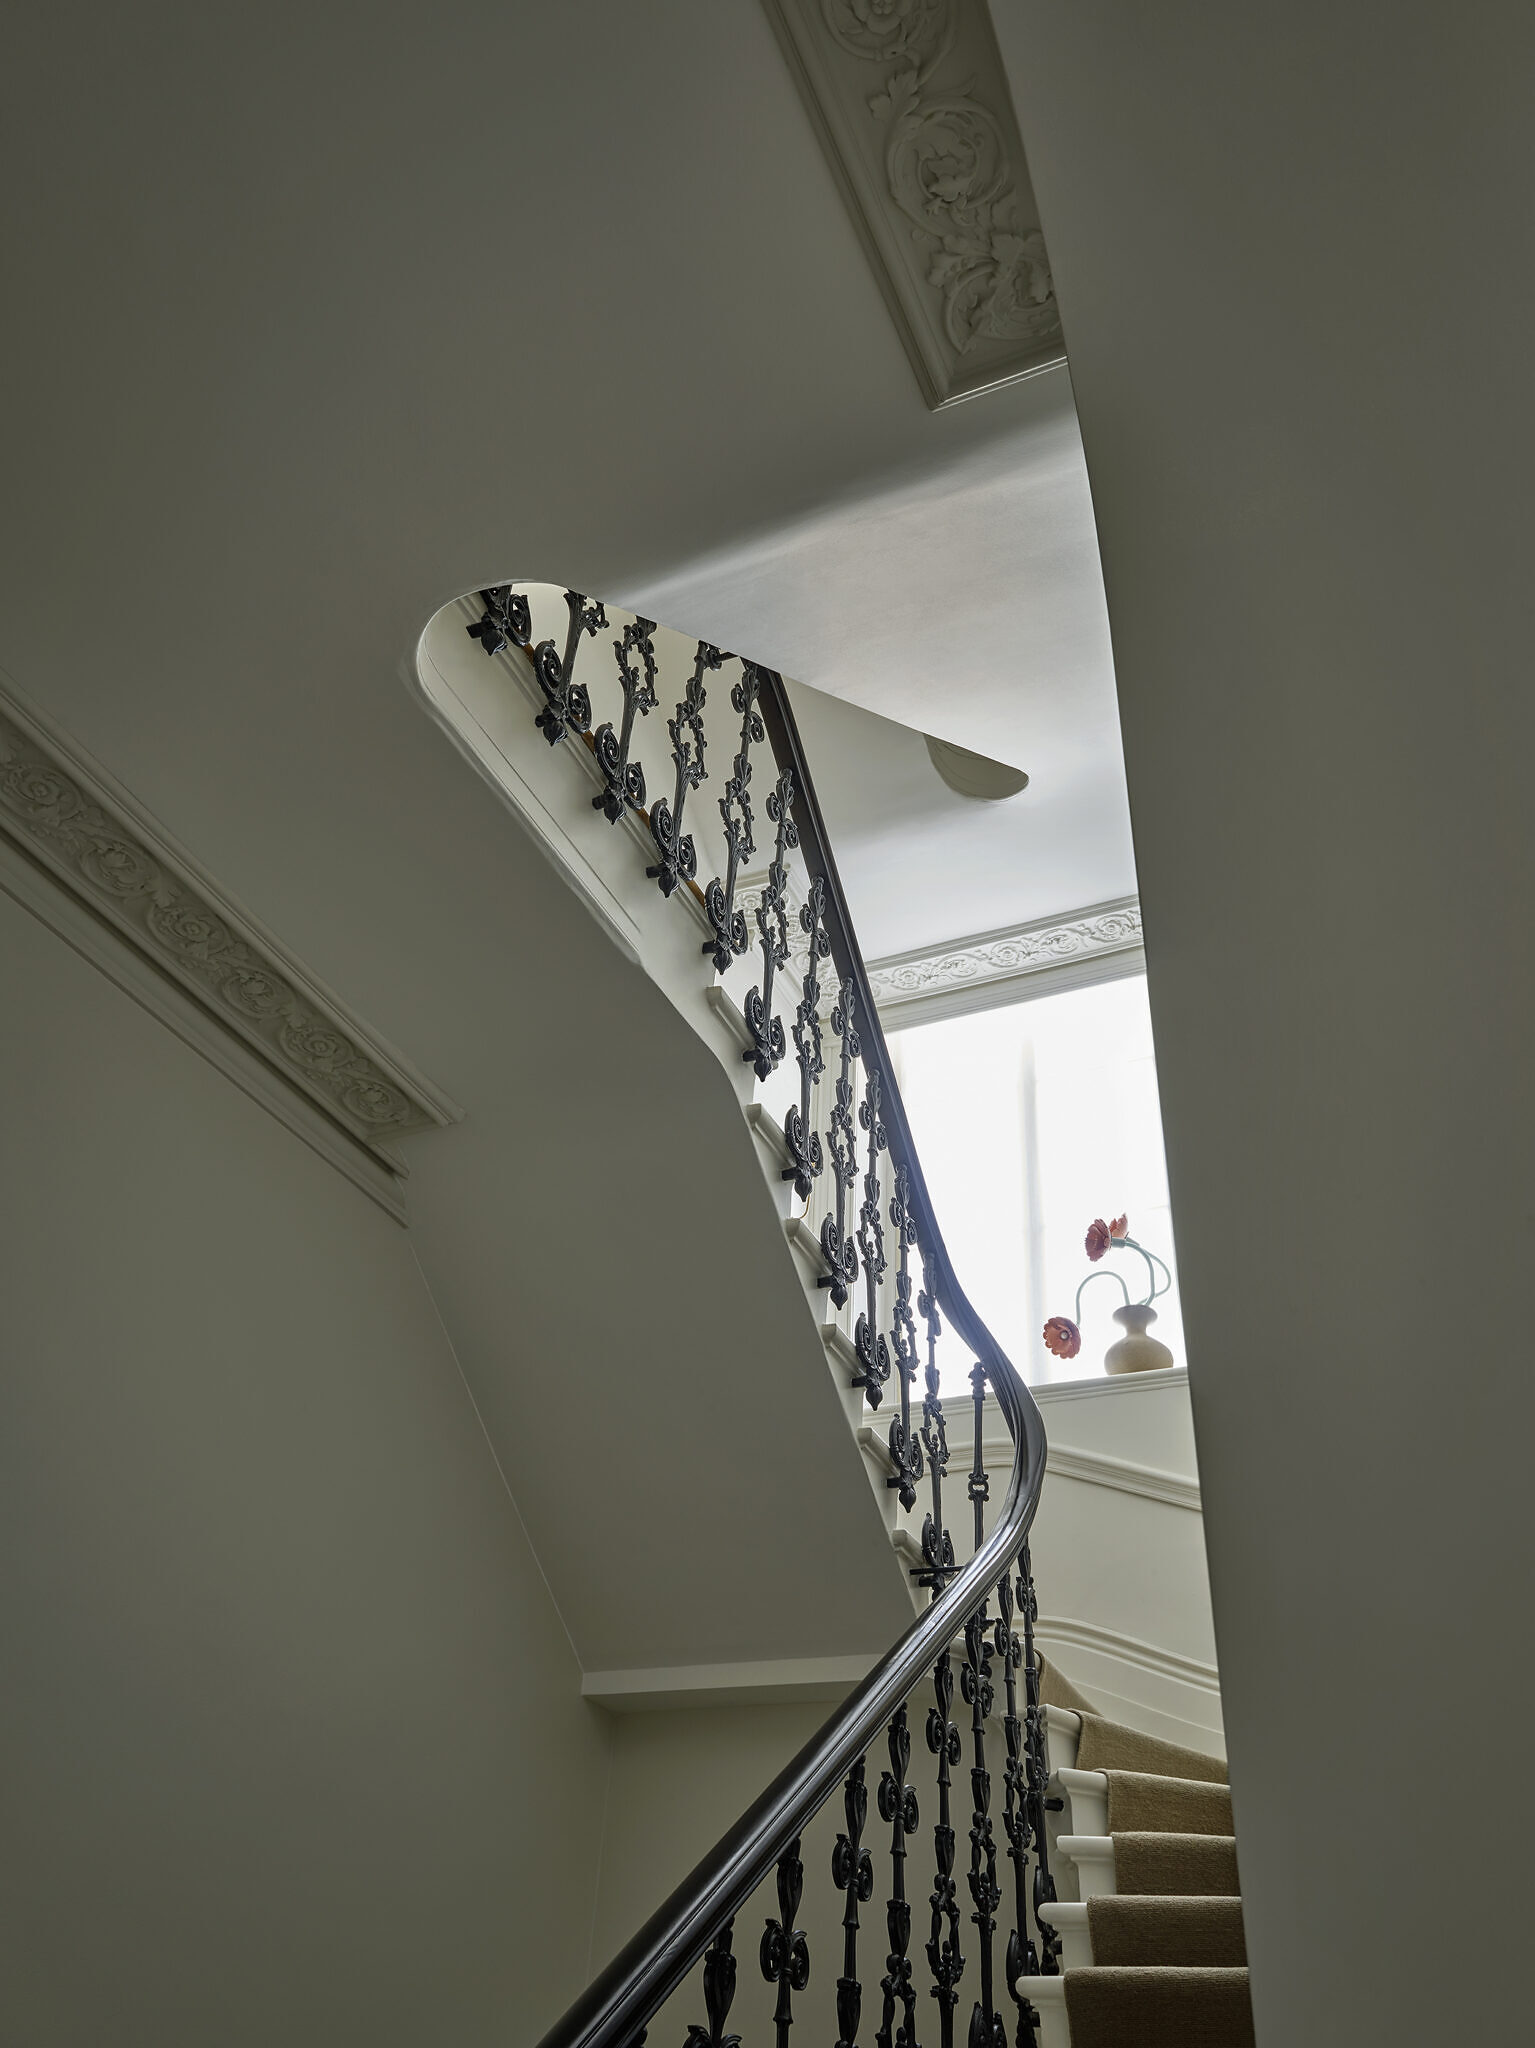 Image of the staircase, with black rails and white ceilings.